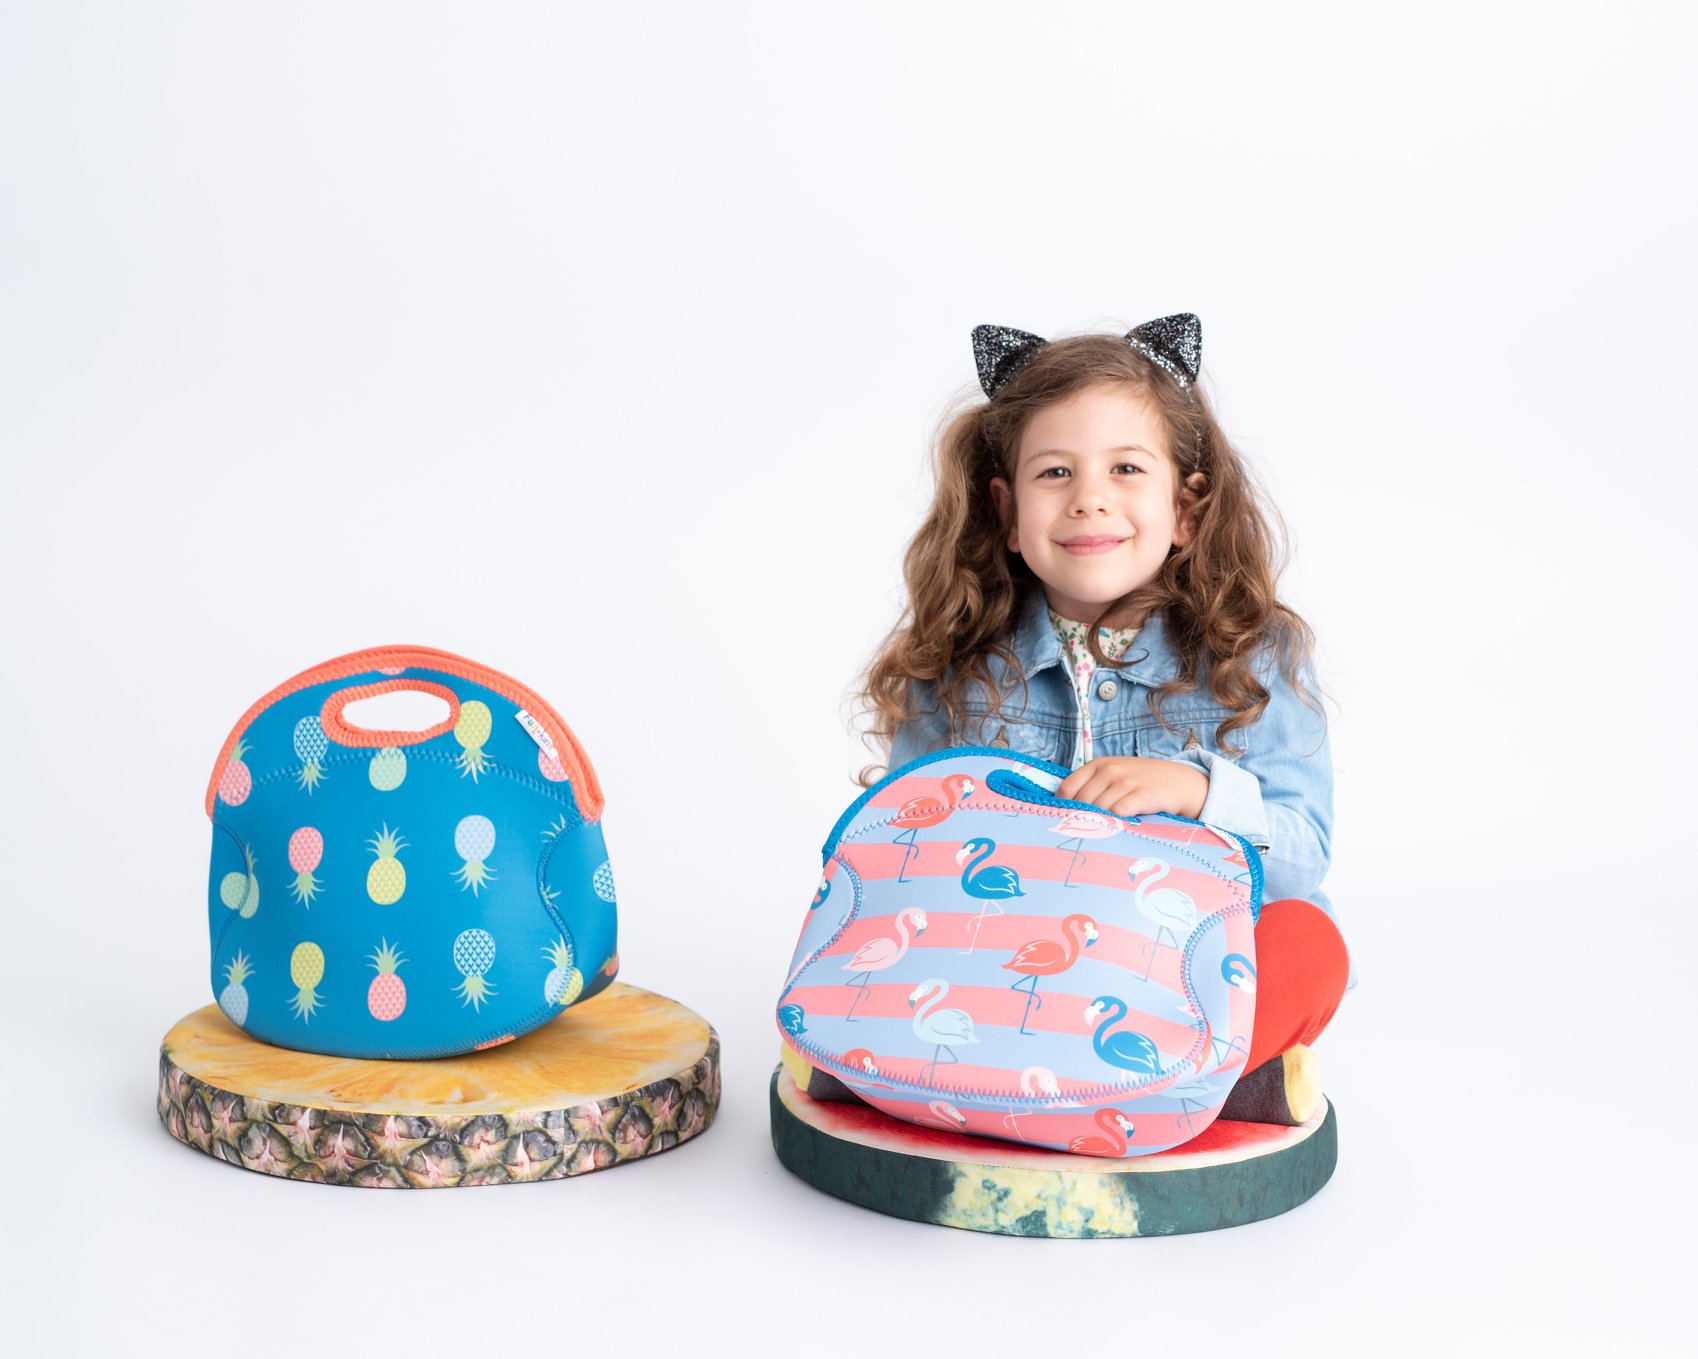 Neoprene Lunch Bag: Sustainable and Recyclable Options for Kids